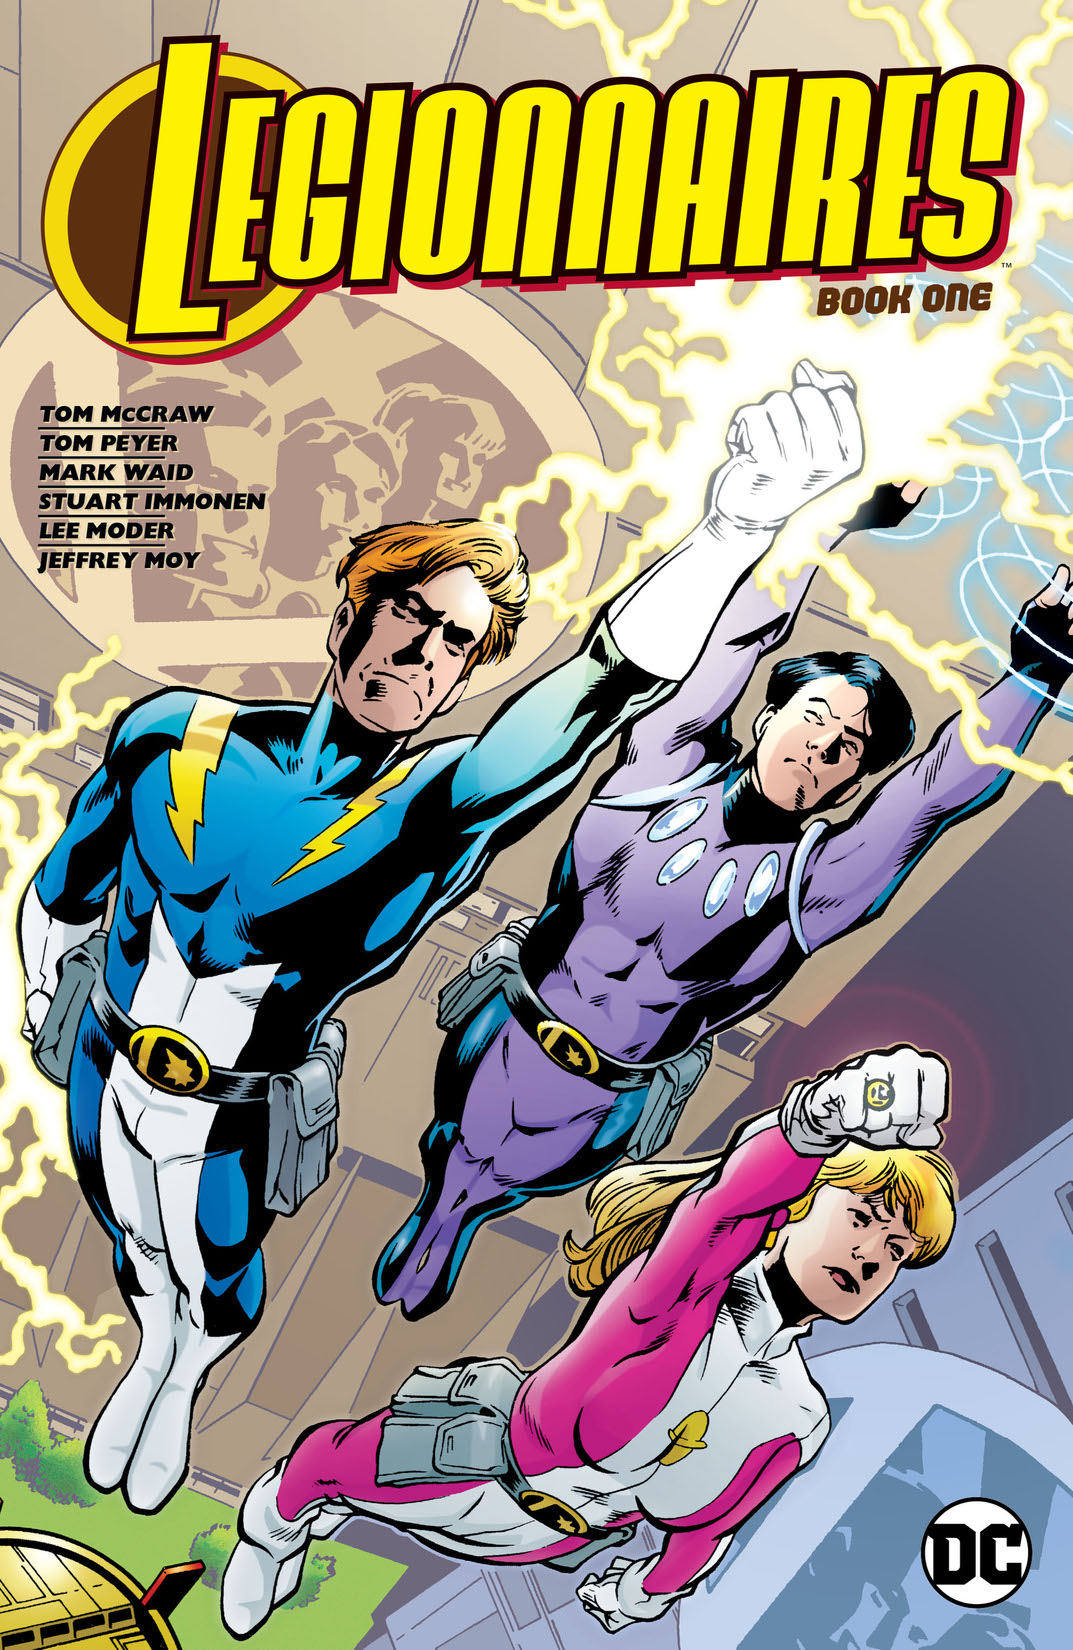 Legionnaires Book One preview images